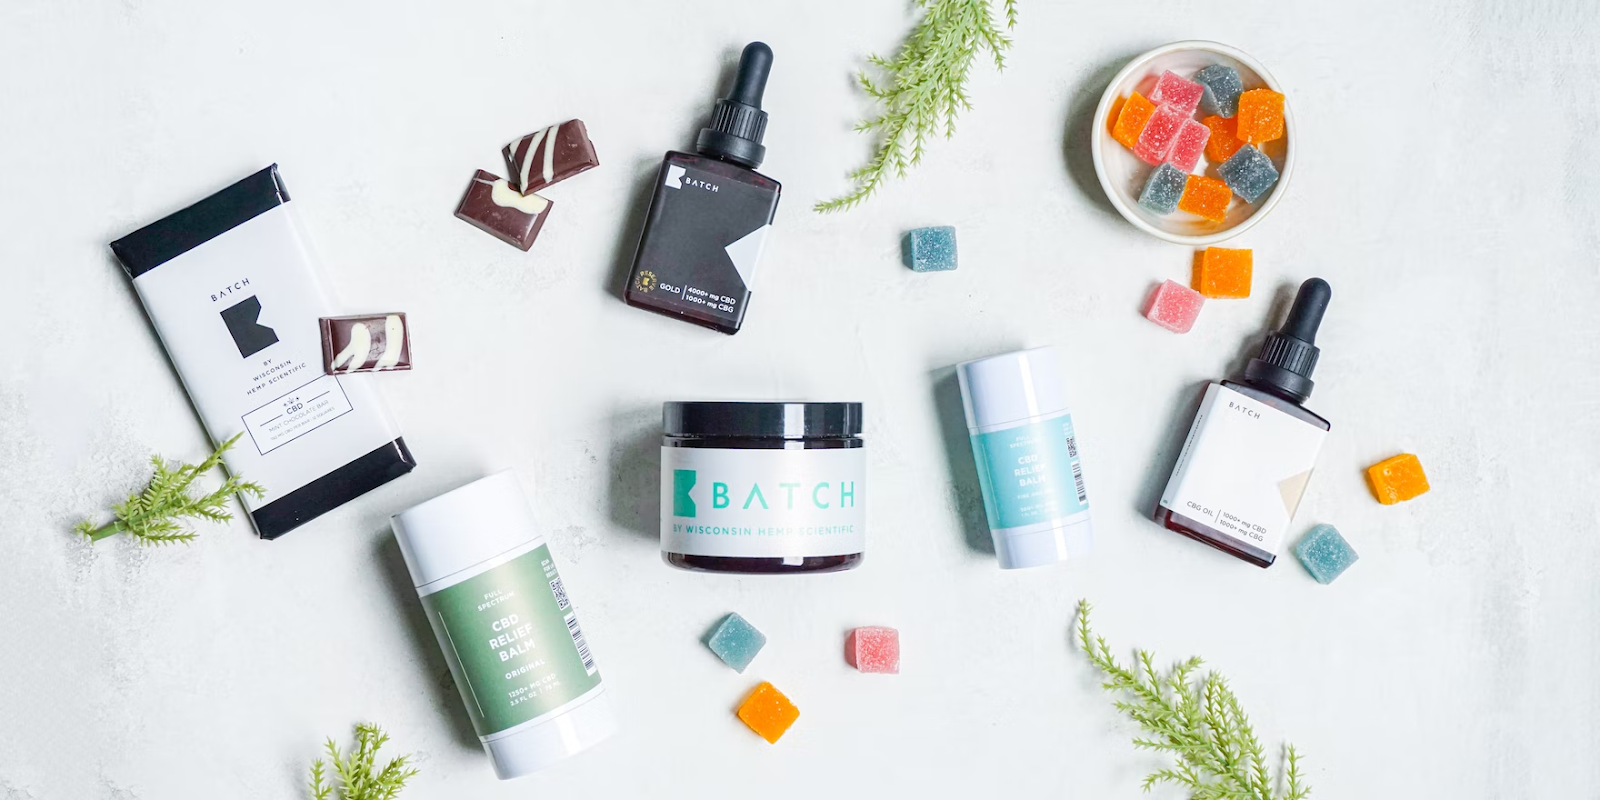 7 Things You Ought To Know About Marketing CBD Products